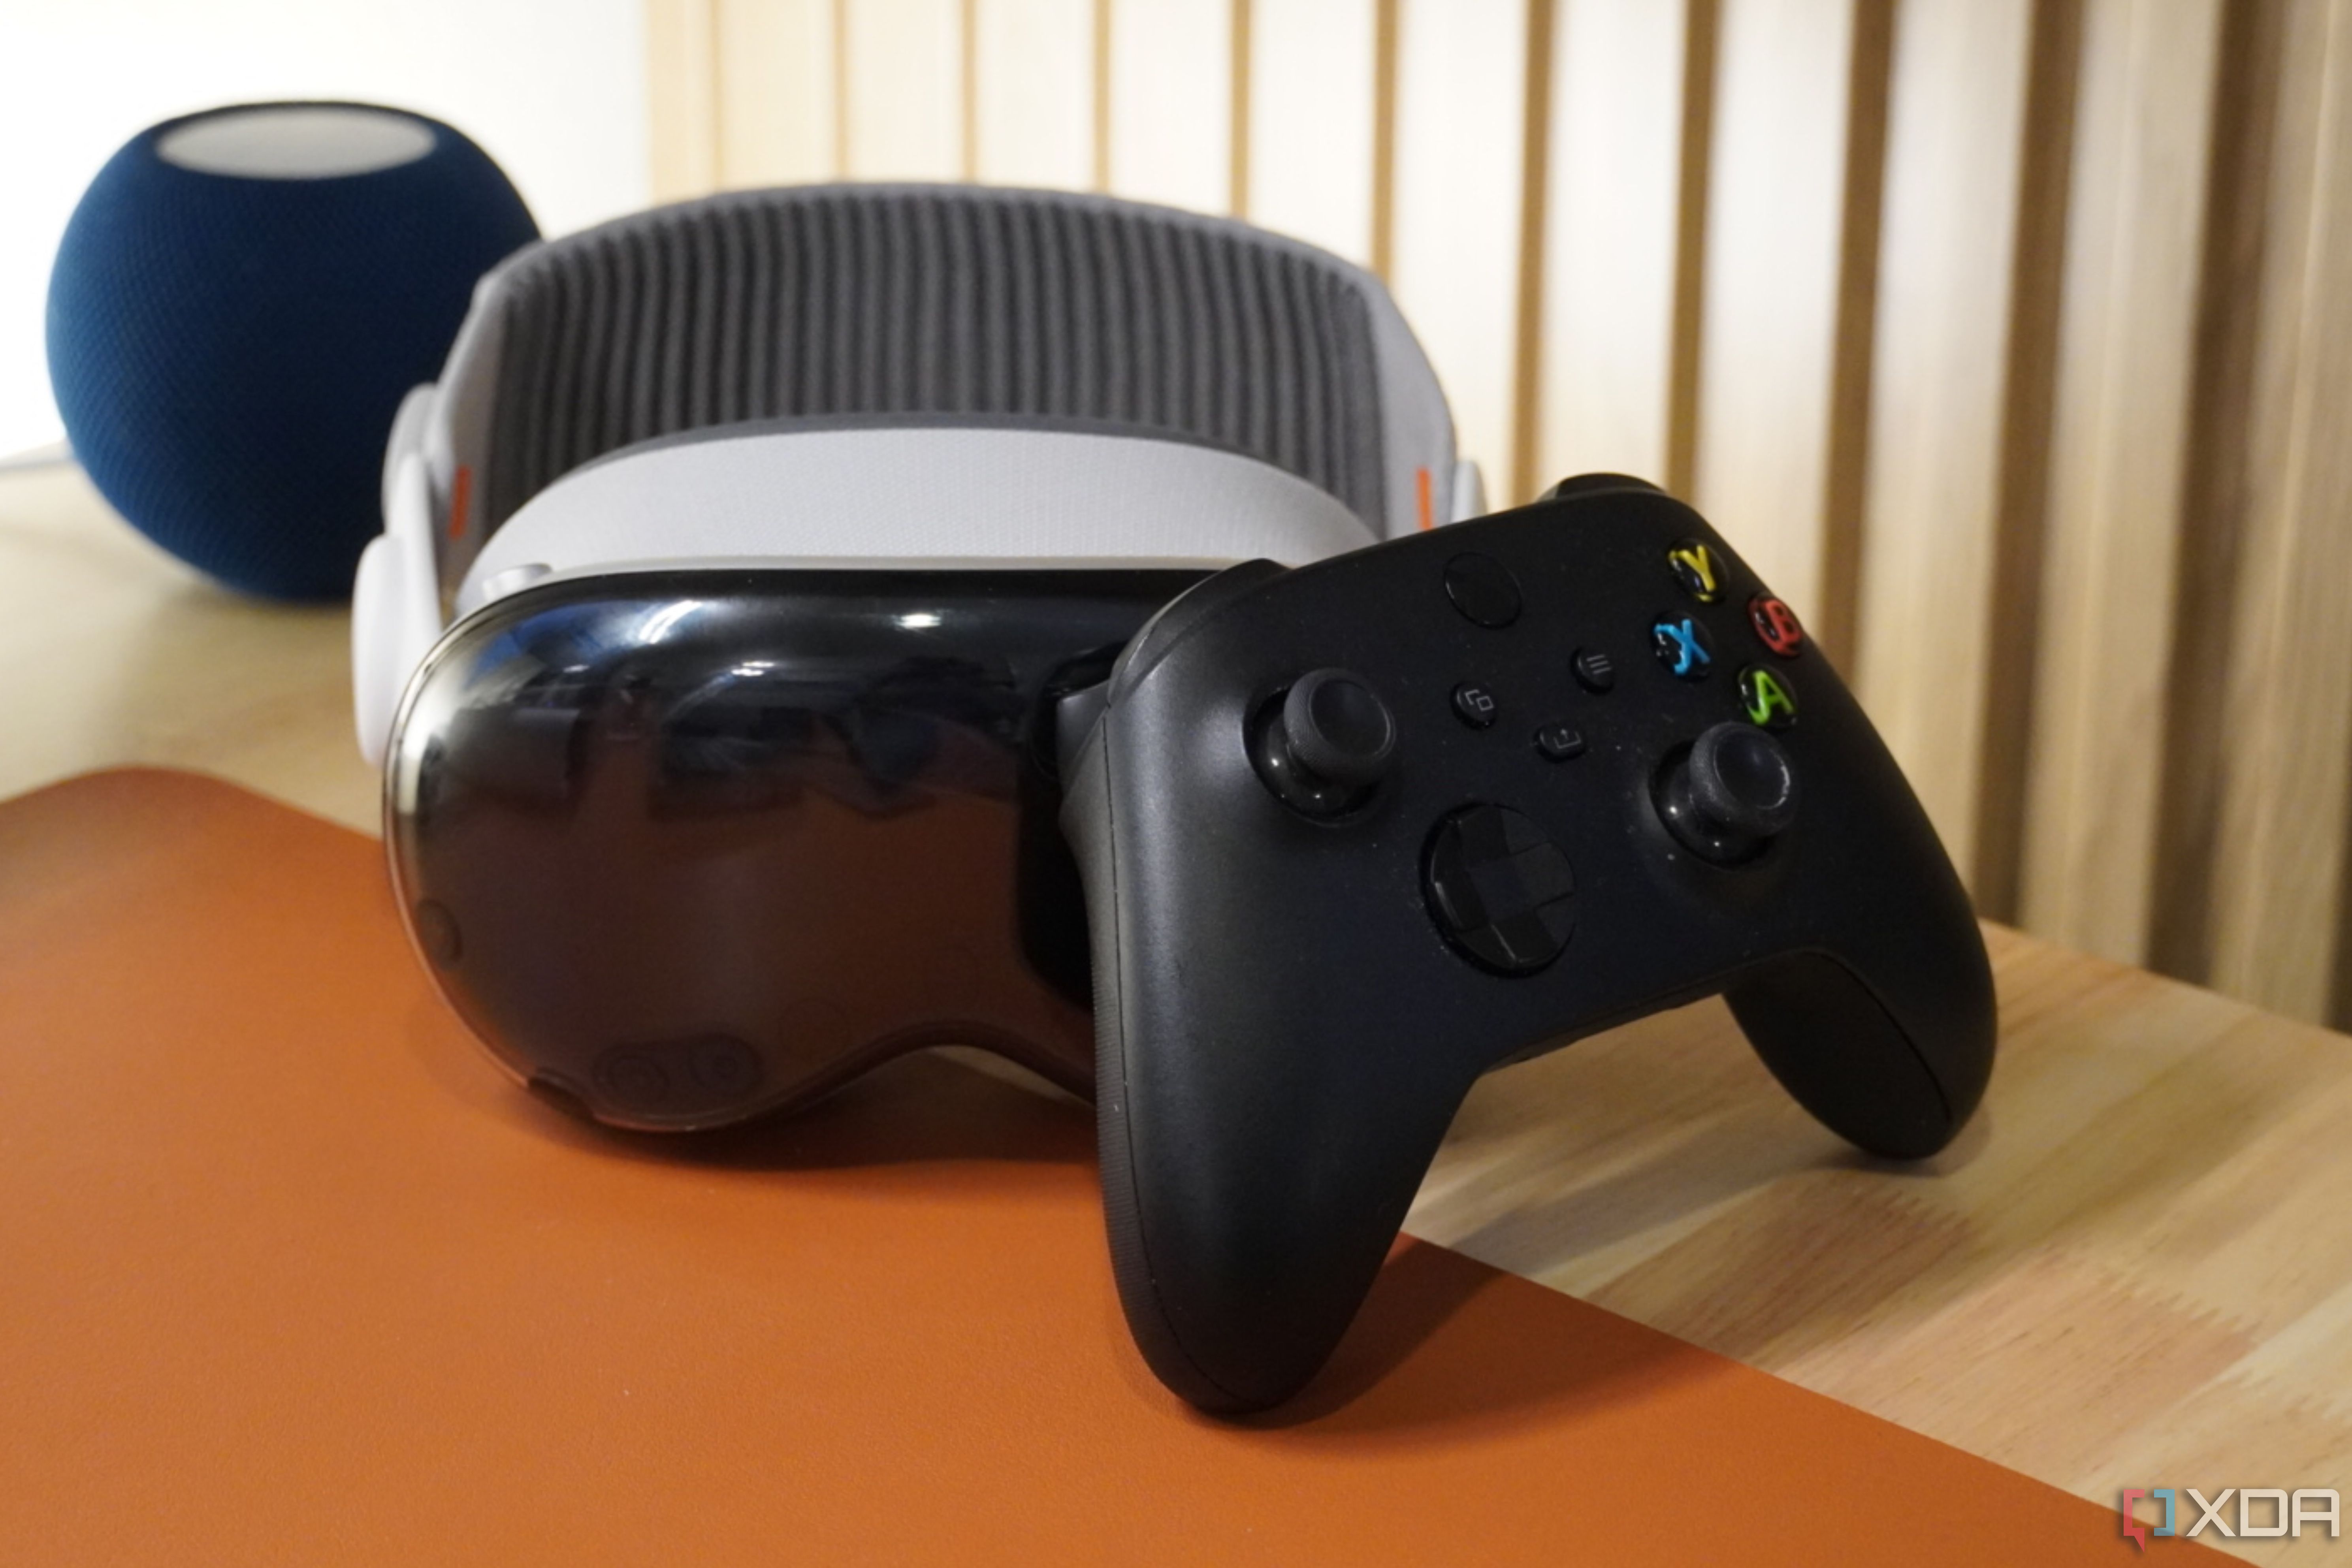 A Vision Pro headset with a controller.